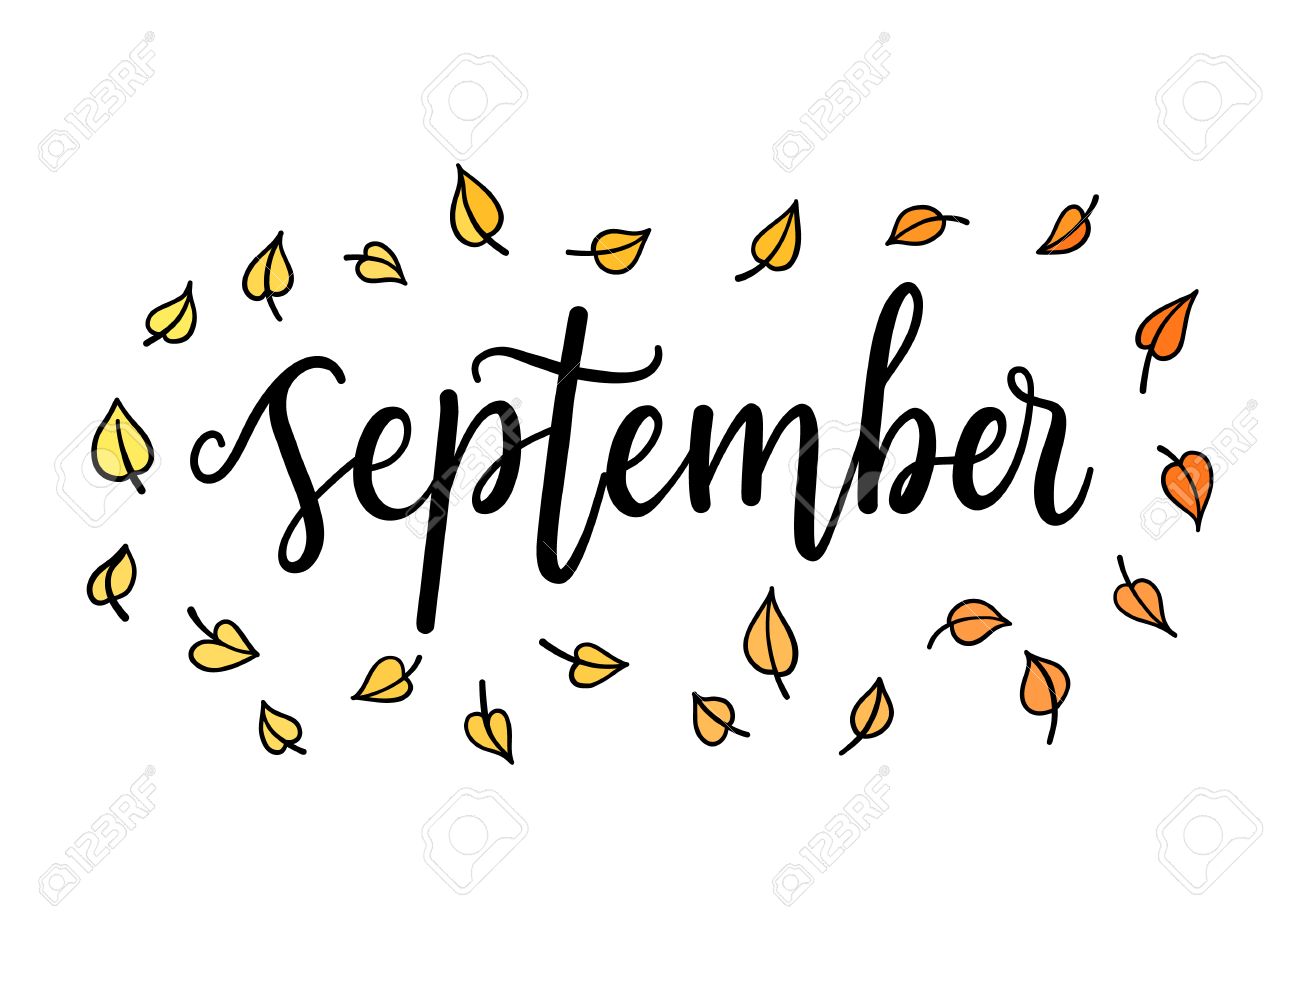 September word cliparts.